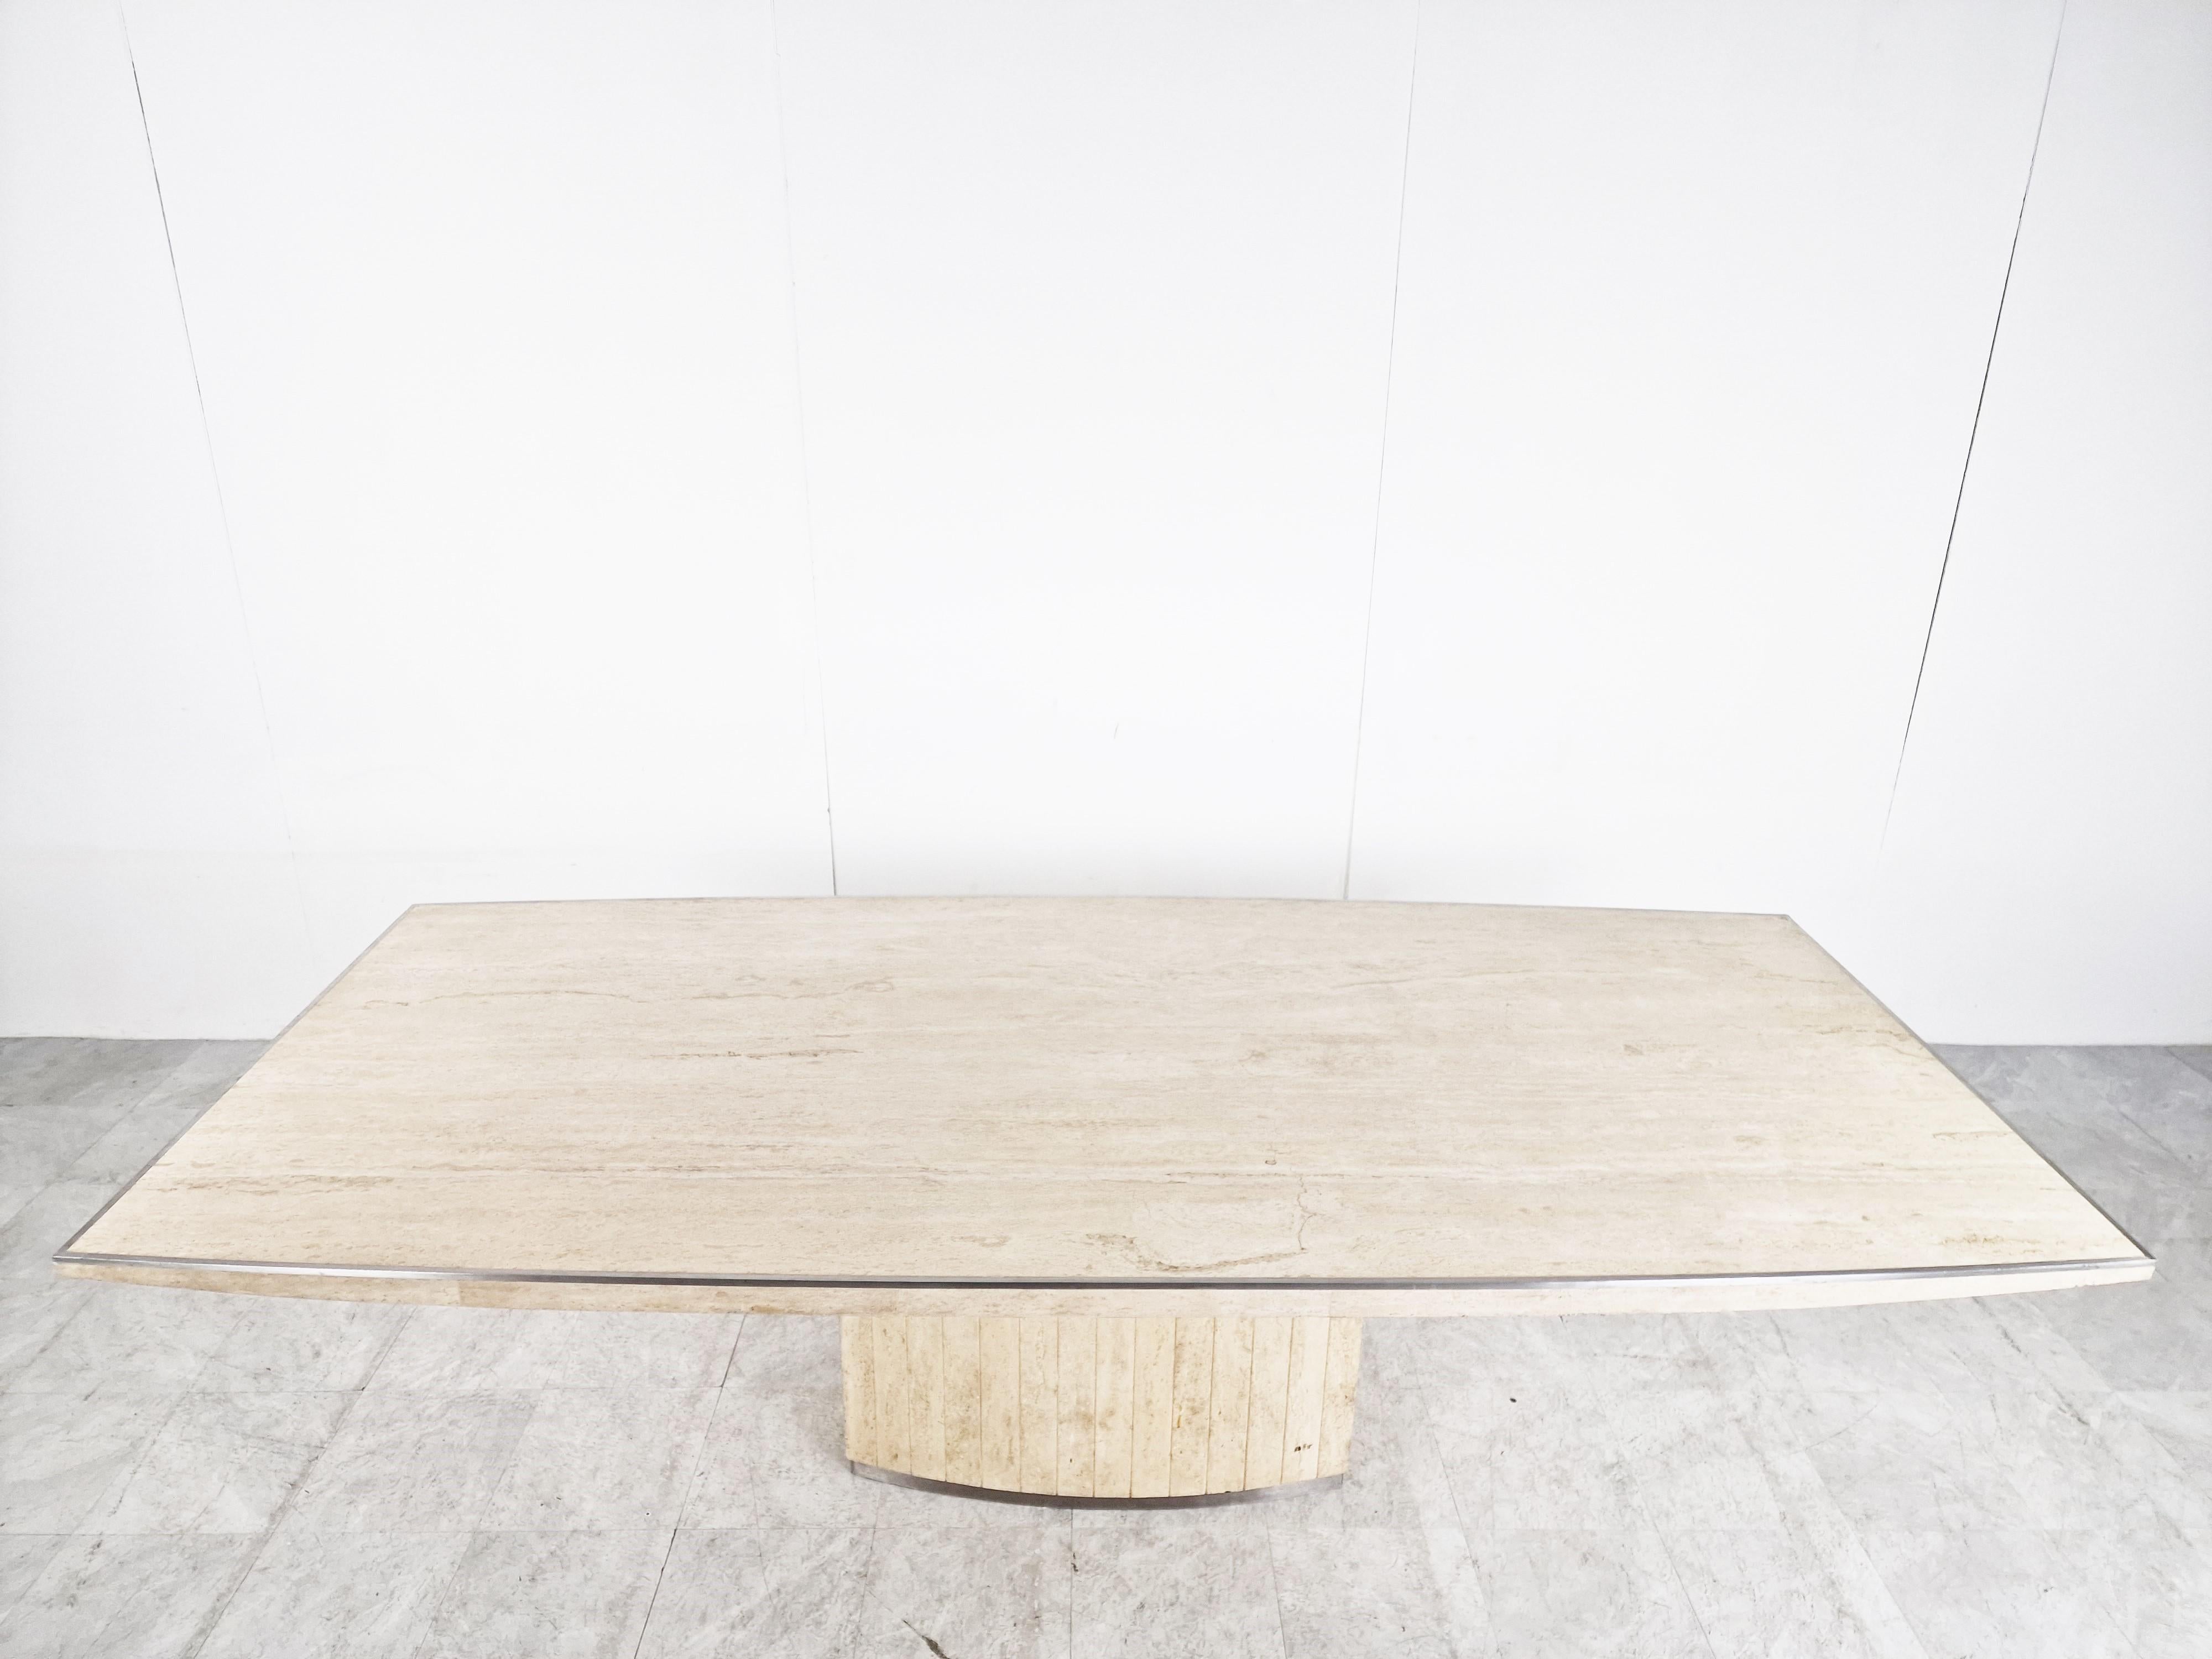 Rare signed dining table in travertine by Willy Rizzo.

The table is signed on the bottom right.

Brushed aluminum finish on the edges and on the base. 

1970s - Italy

Measures: H 29.53 in. x W 798.42 in. x D 43.31 in.
H 75 cm x W 250 cm x